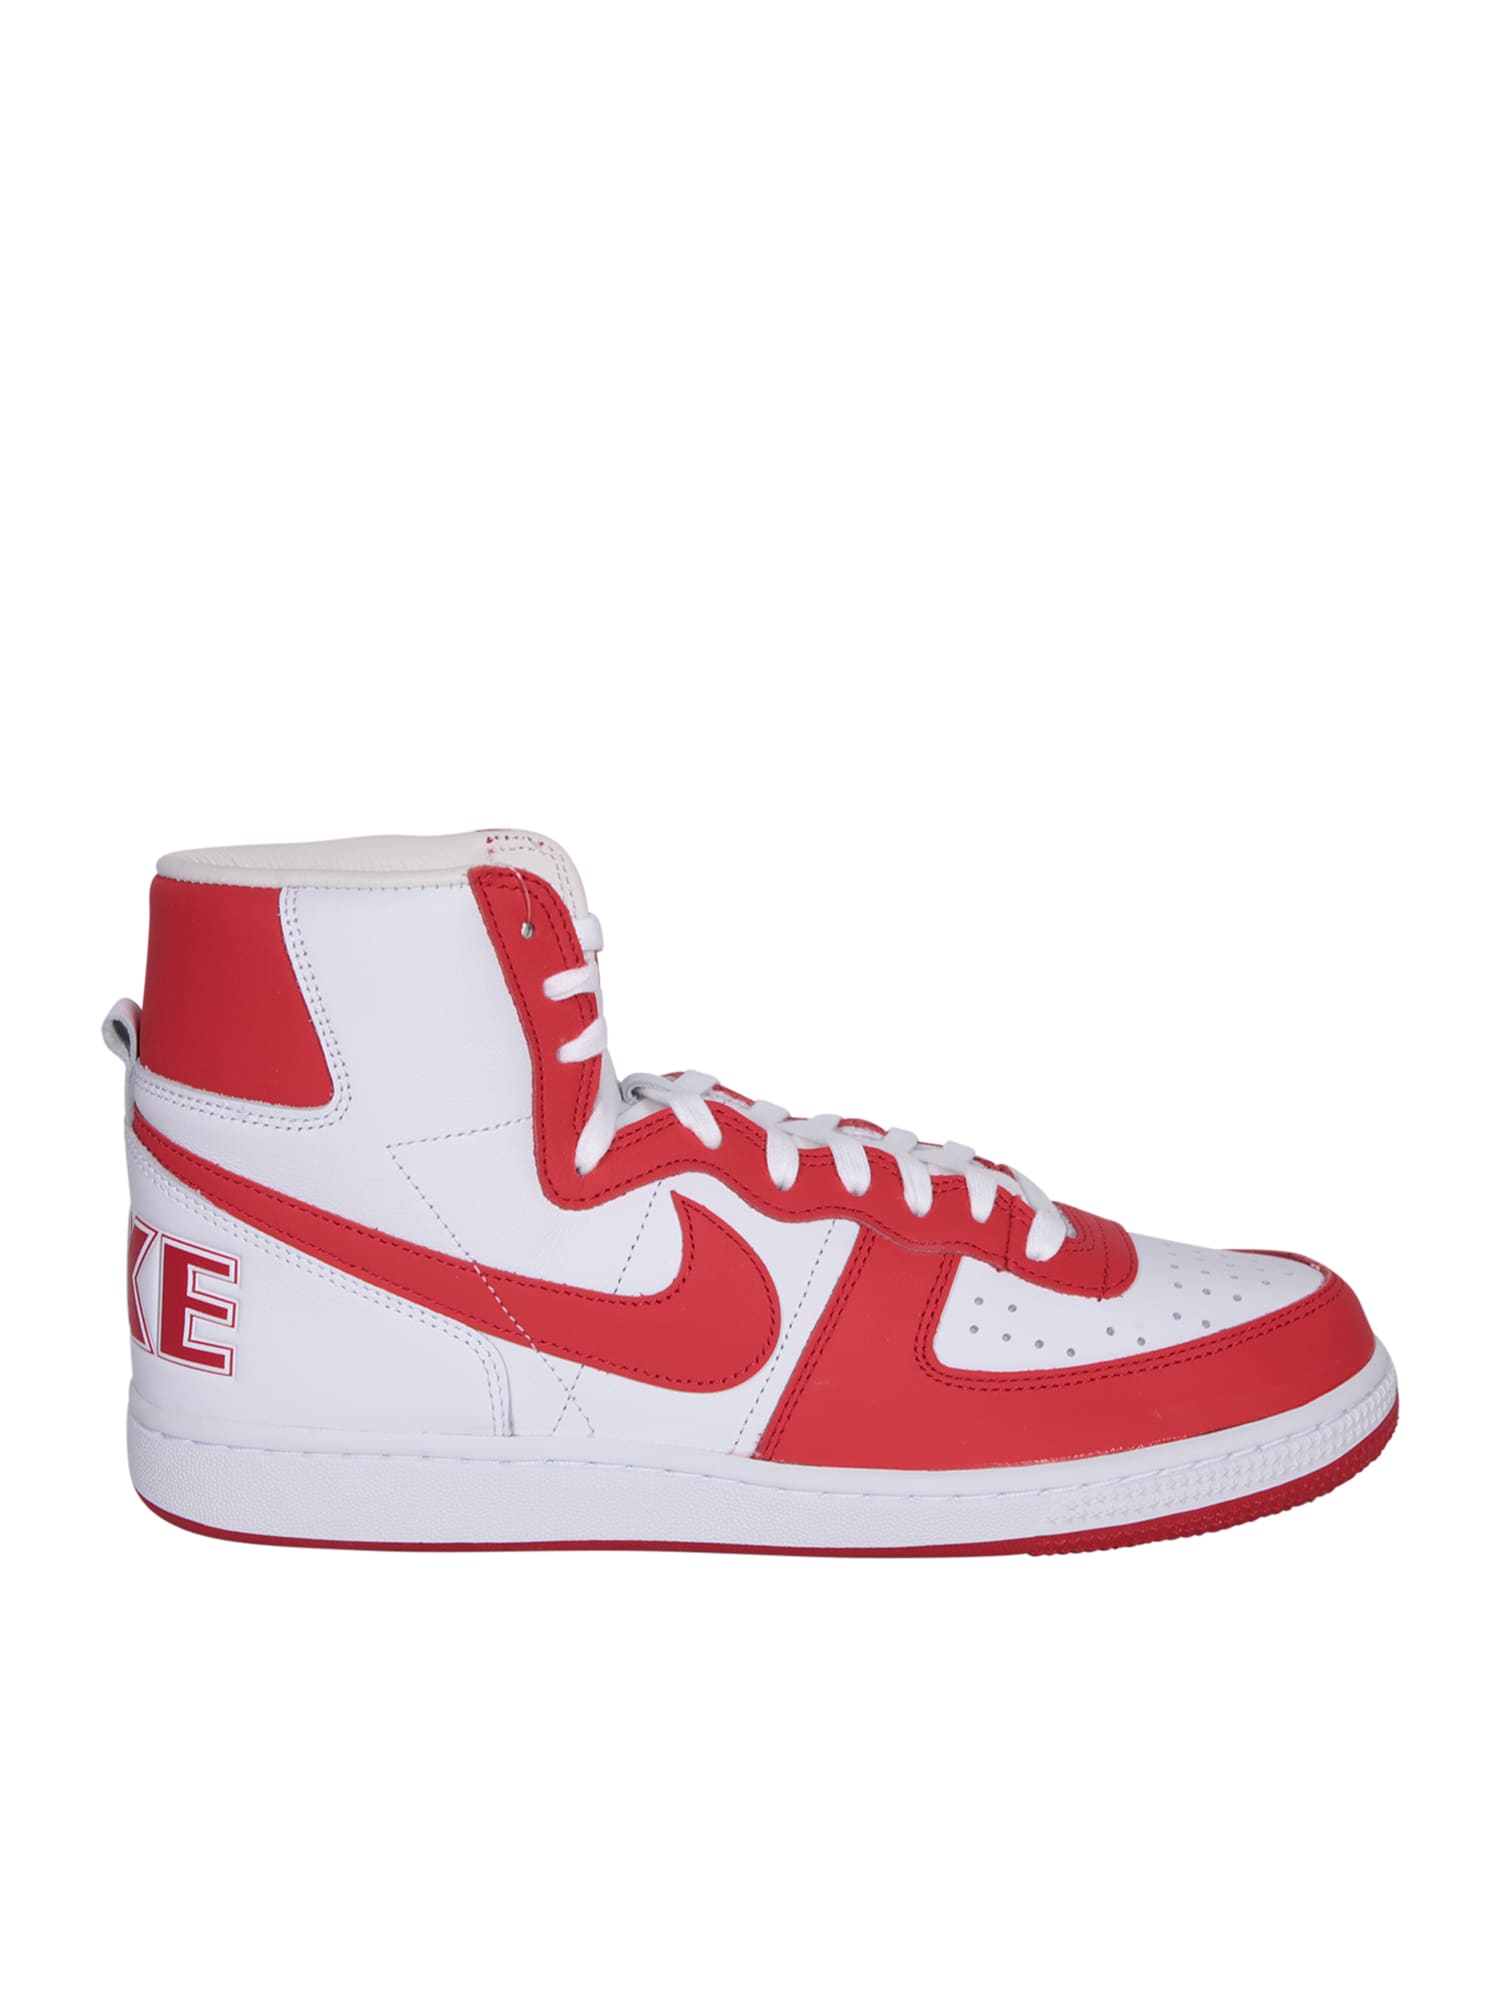 Comme Des Garçons Homme Deux Trainers High-top Nike Terminator White/red